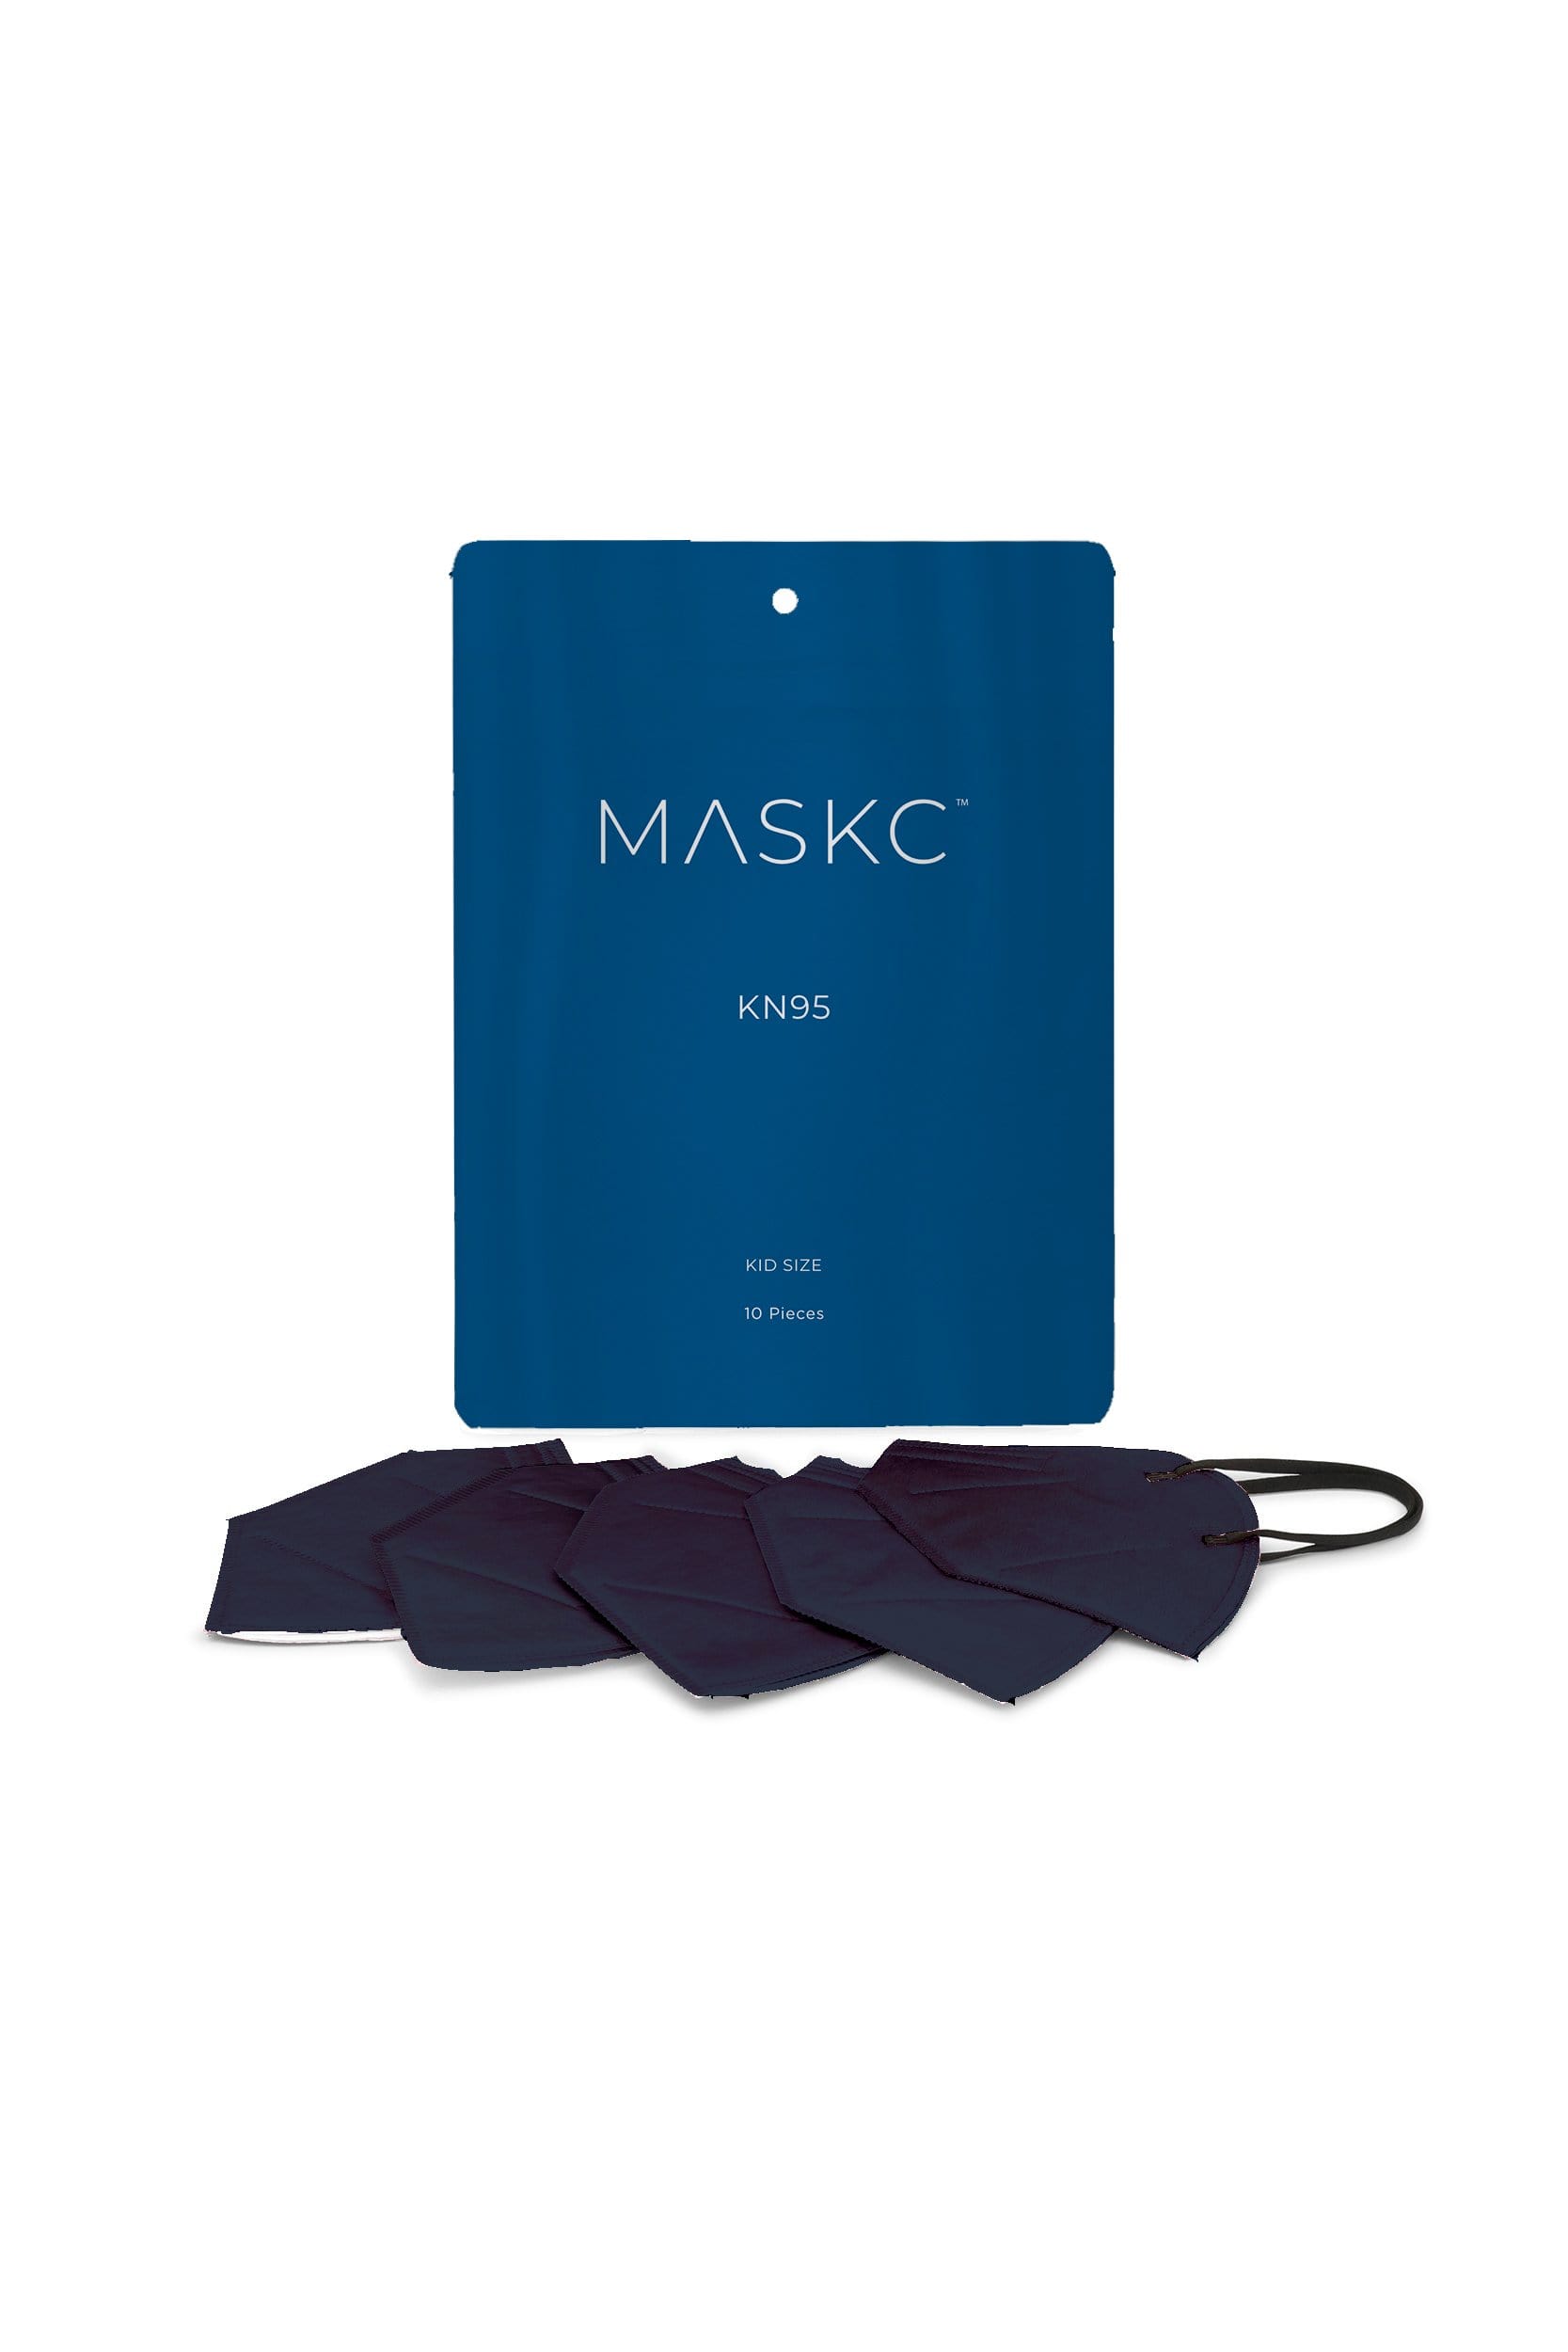 Pack of Kids Navy Blue KN95 face masks. Each pack contains stylish high quality face masks. 